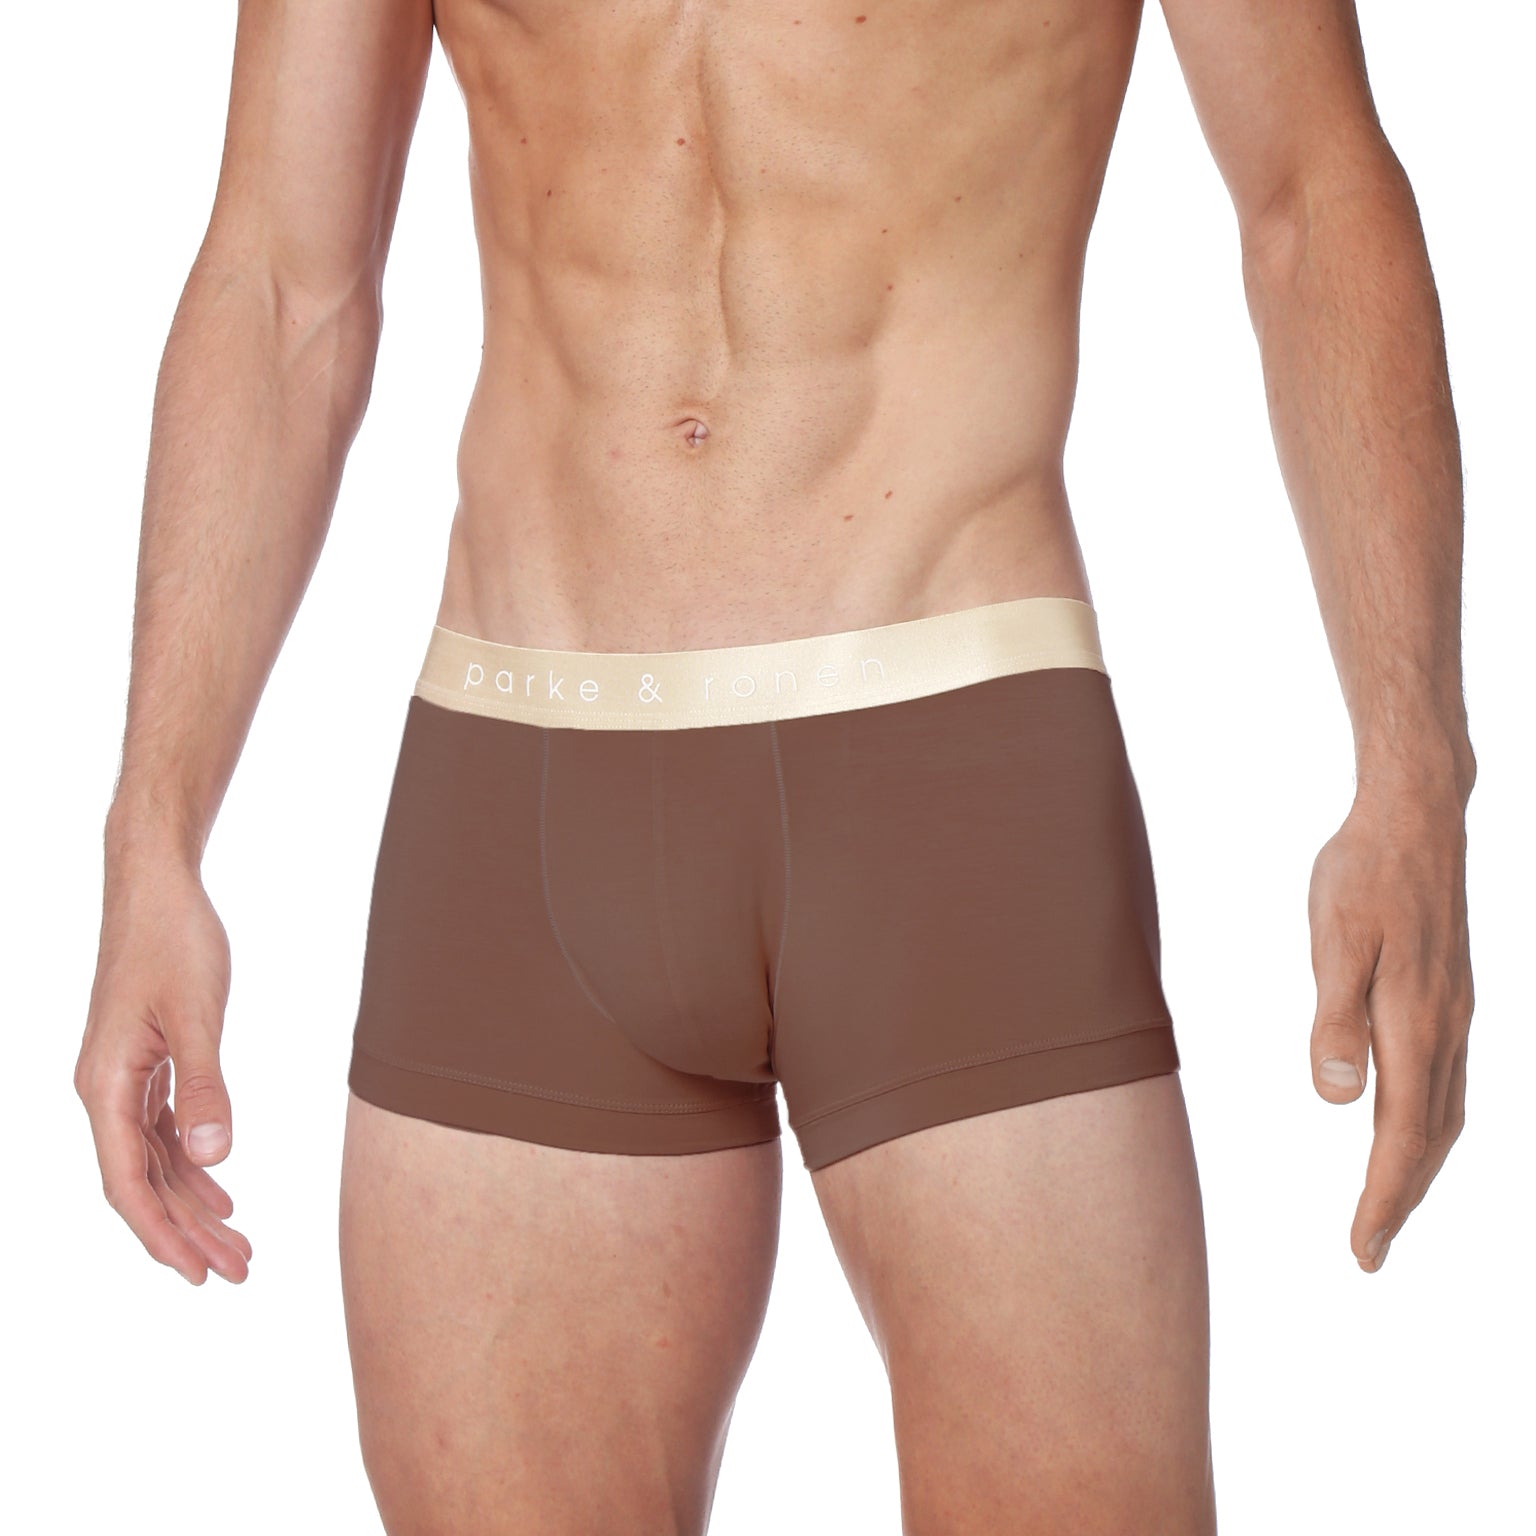 NEW- Chocolate Low Rise Trunk - parke & ronen